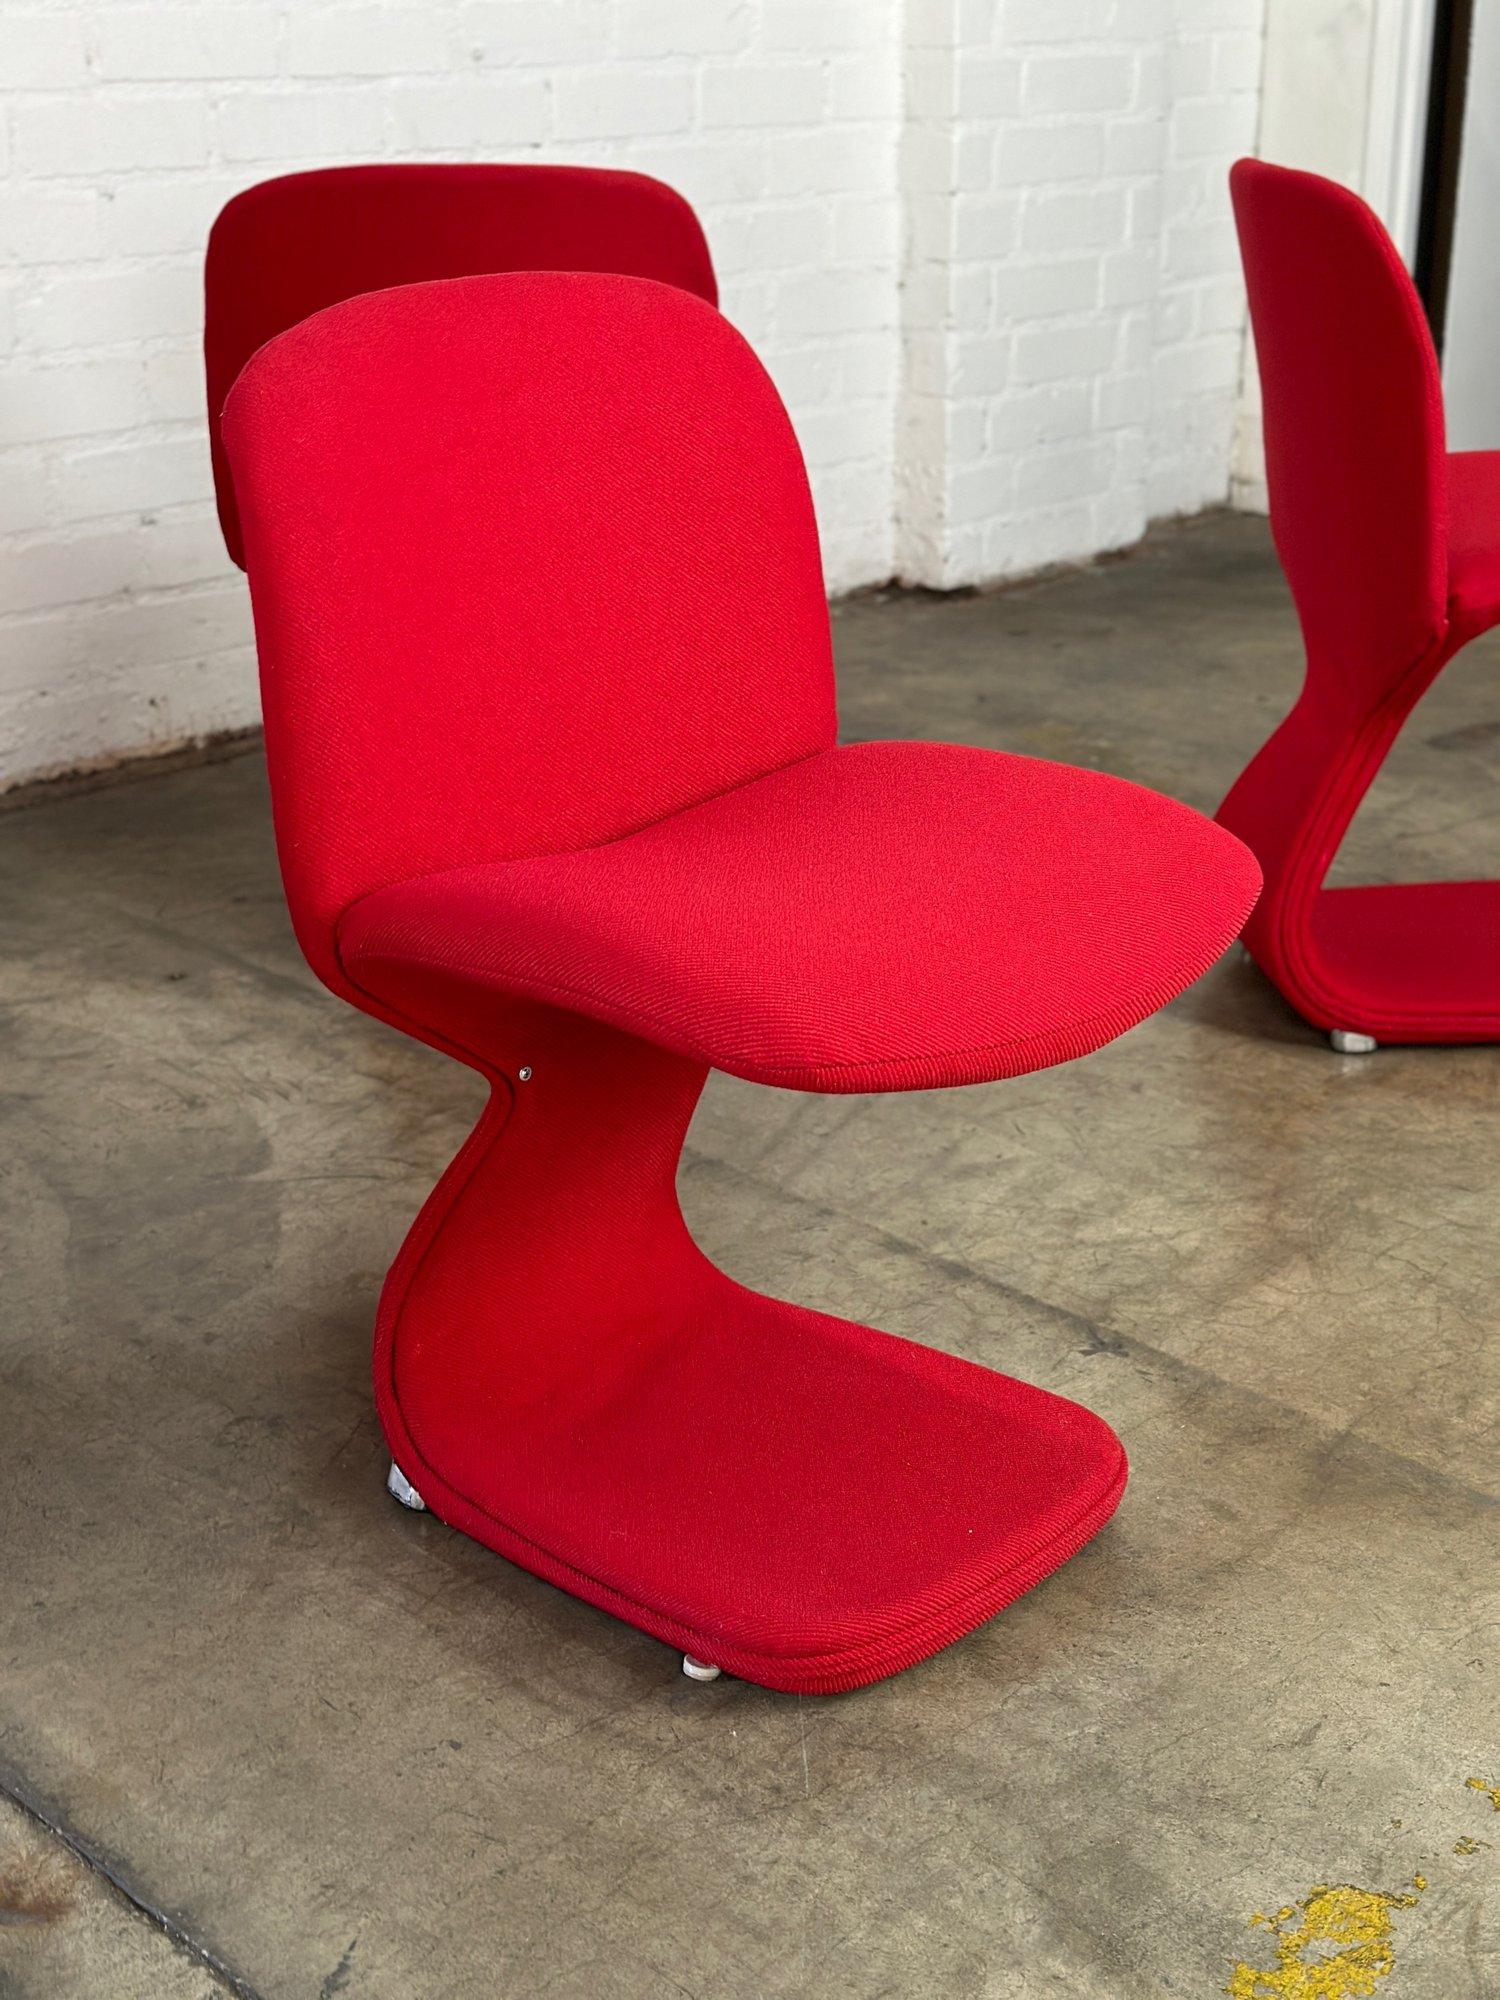 Italian Cantilevered Chairs by Joe Colombo - set of four In Good Condition For Sale In Los Angeles, CA